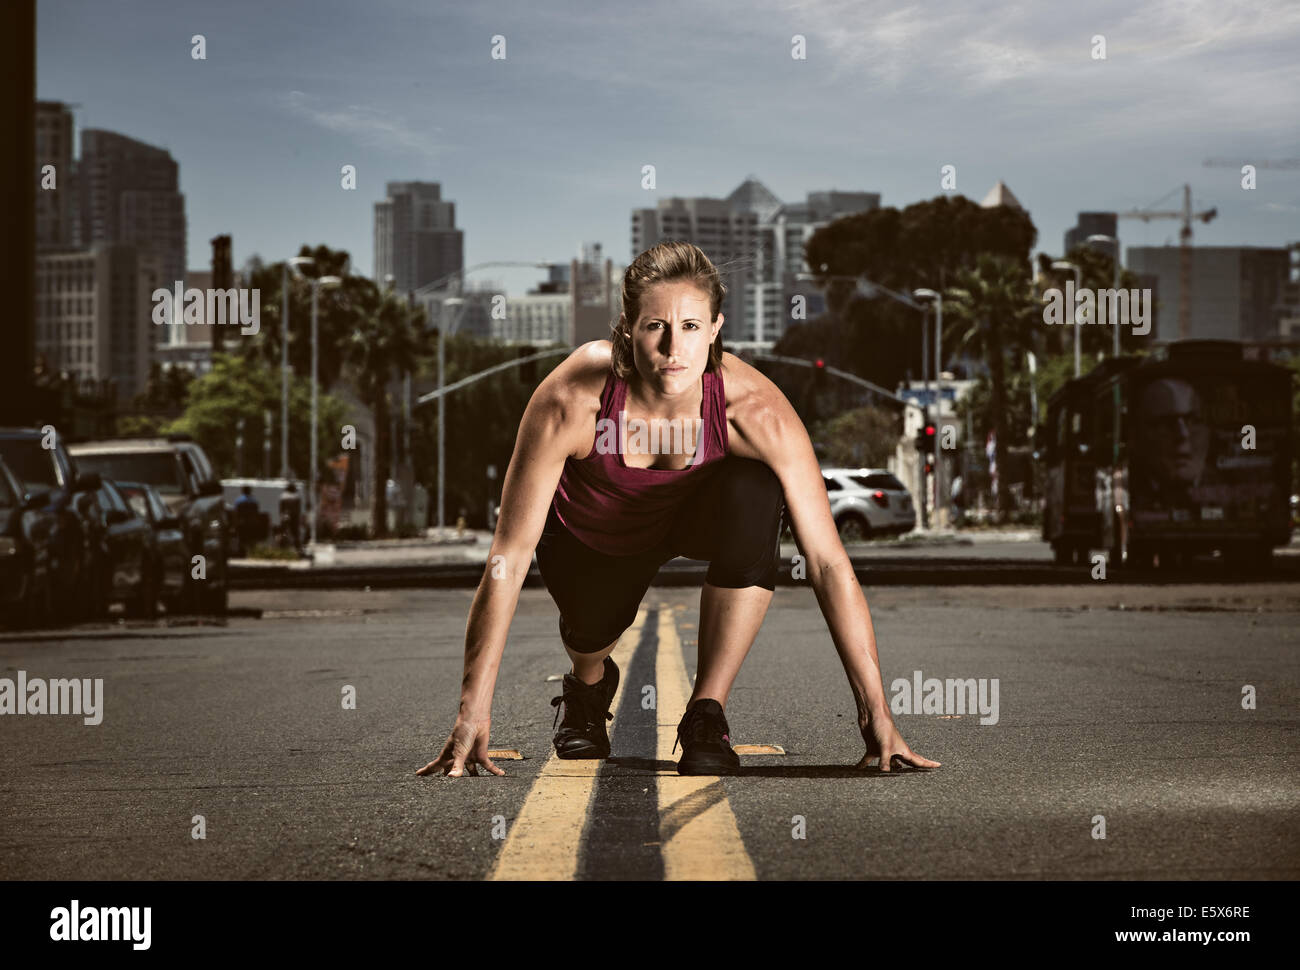 Young adult woman in start position in road, getting ready to run Stock Photo